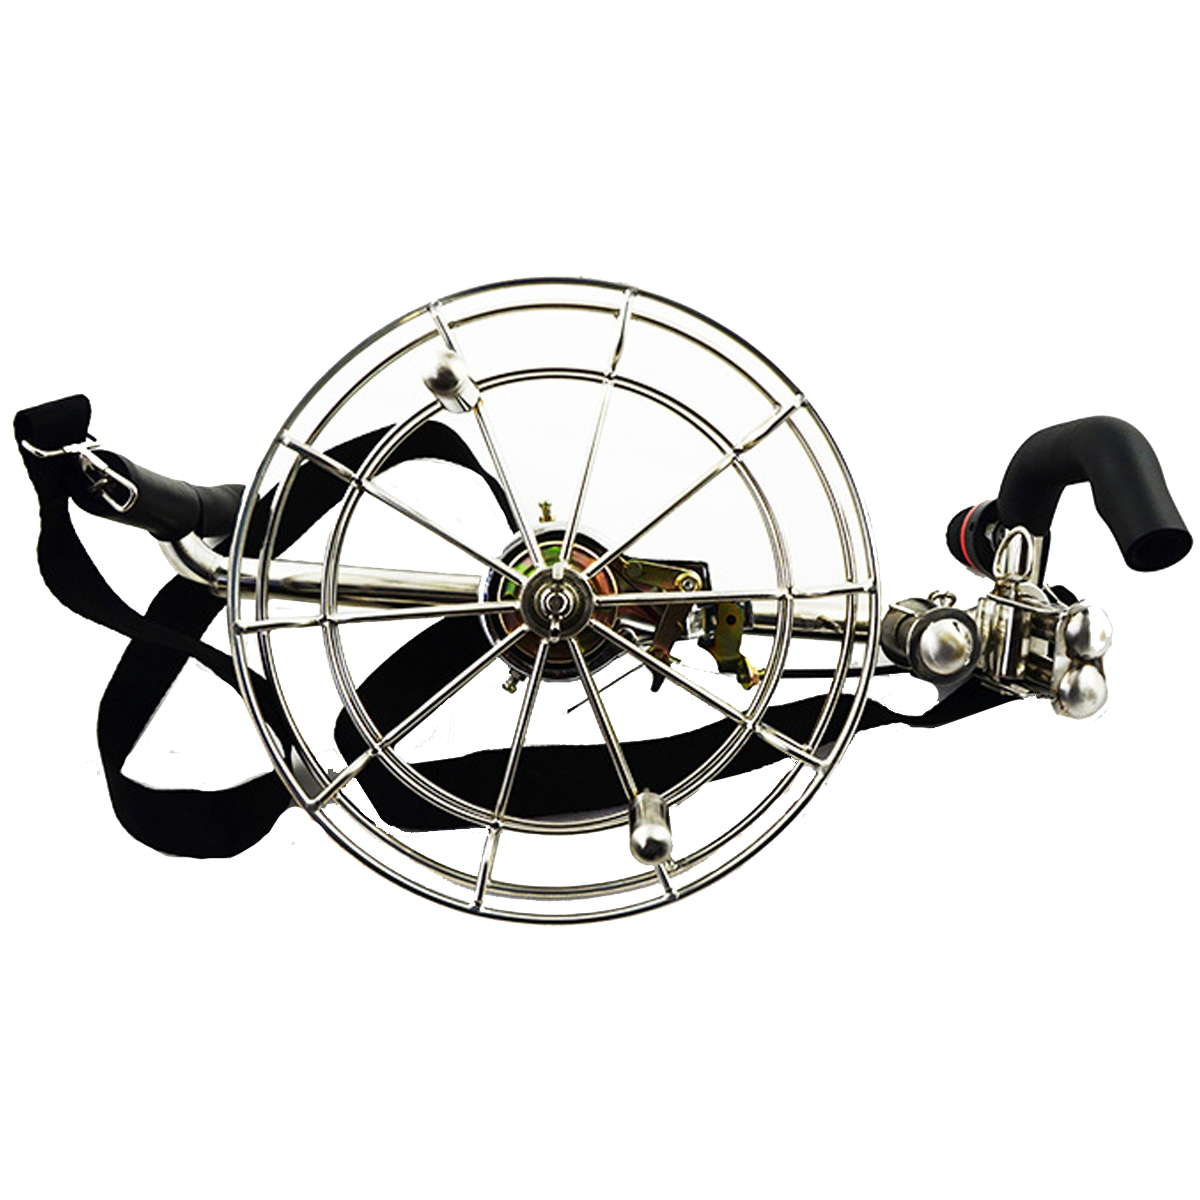 

11" Strong Stainless Kite Line Winder Reel Brakes Control Adult Men